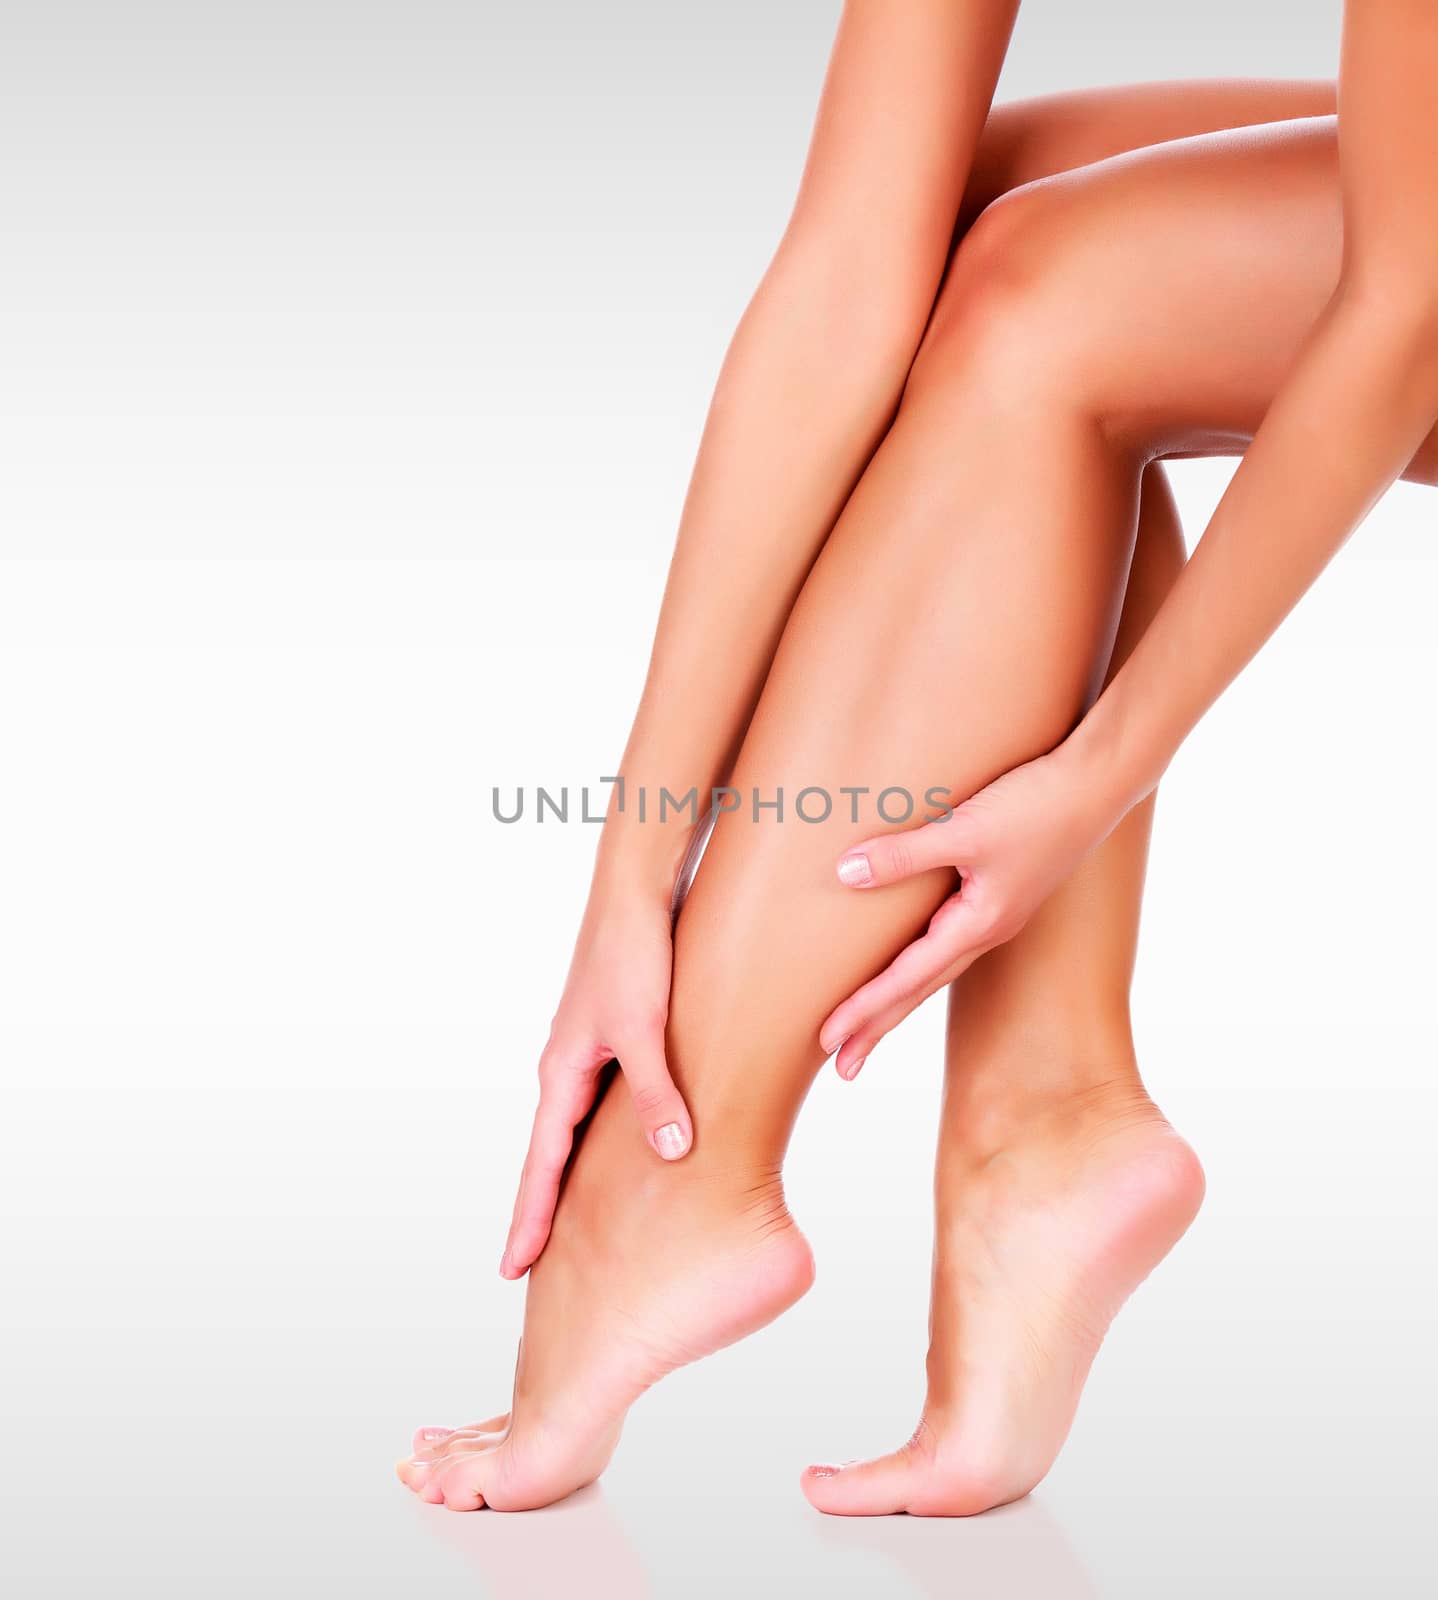 loseup shot of beautiful female legs and hands. Unwanted hair re by Nobilior